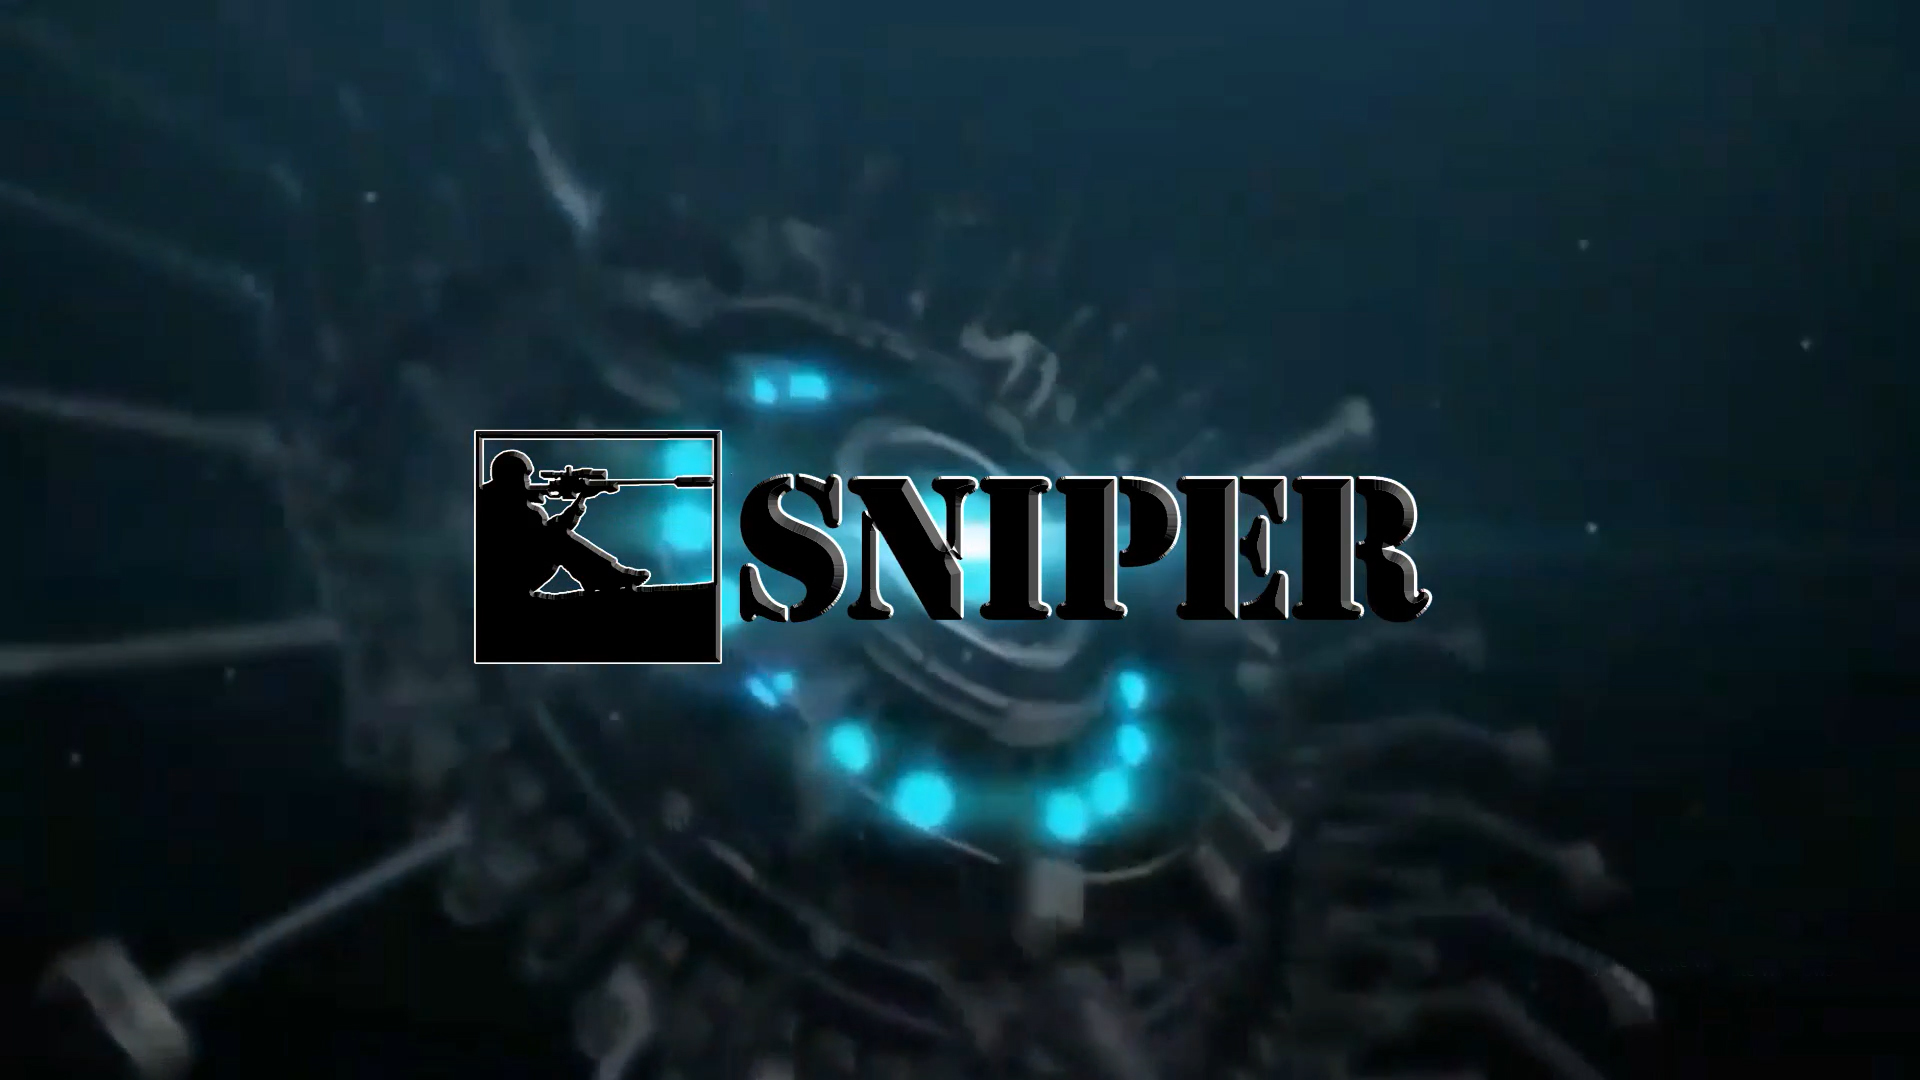 SNIPER let’s get to know each other